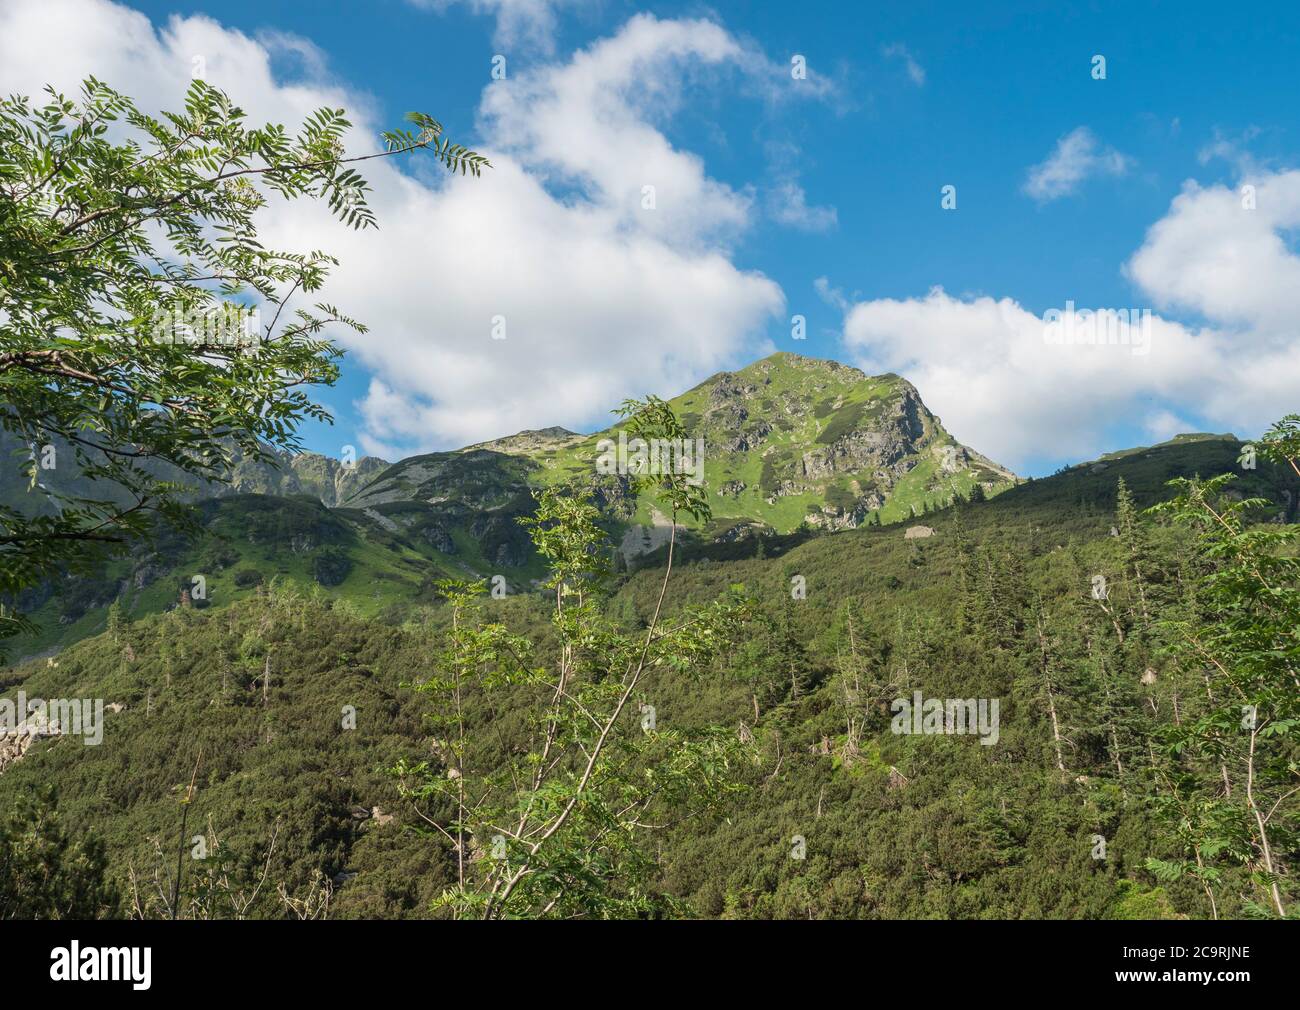 Beautiful mountain landscape with rowen and spruce trees, dwarf scrub pine and sharp green grassy mountain peak. Western Tatras mountains, Rohace Stock Photo